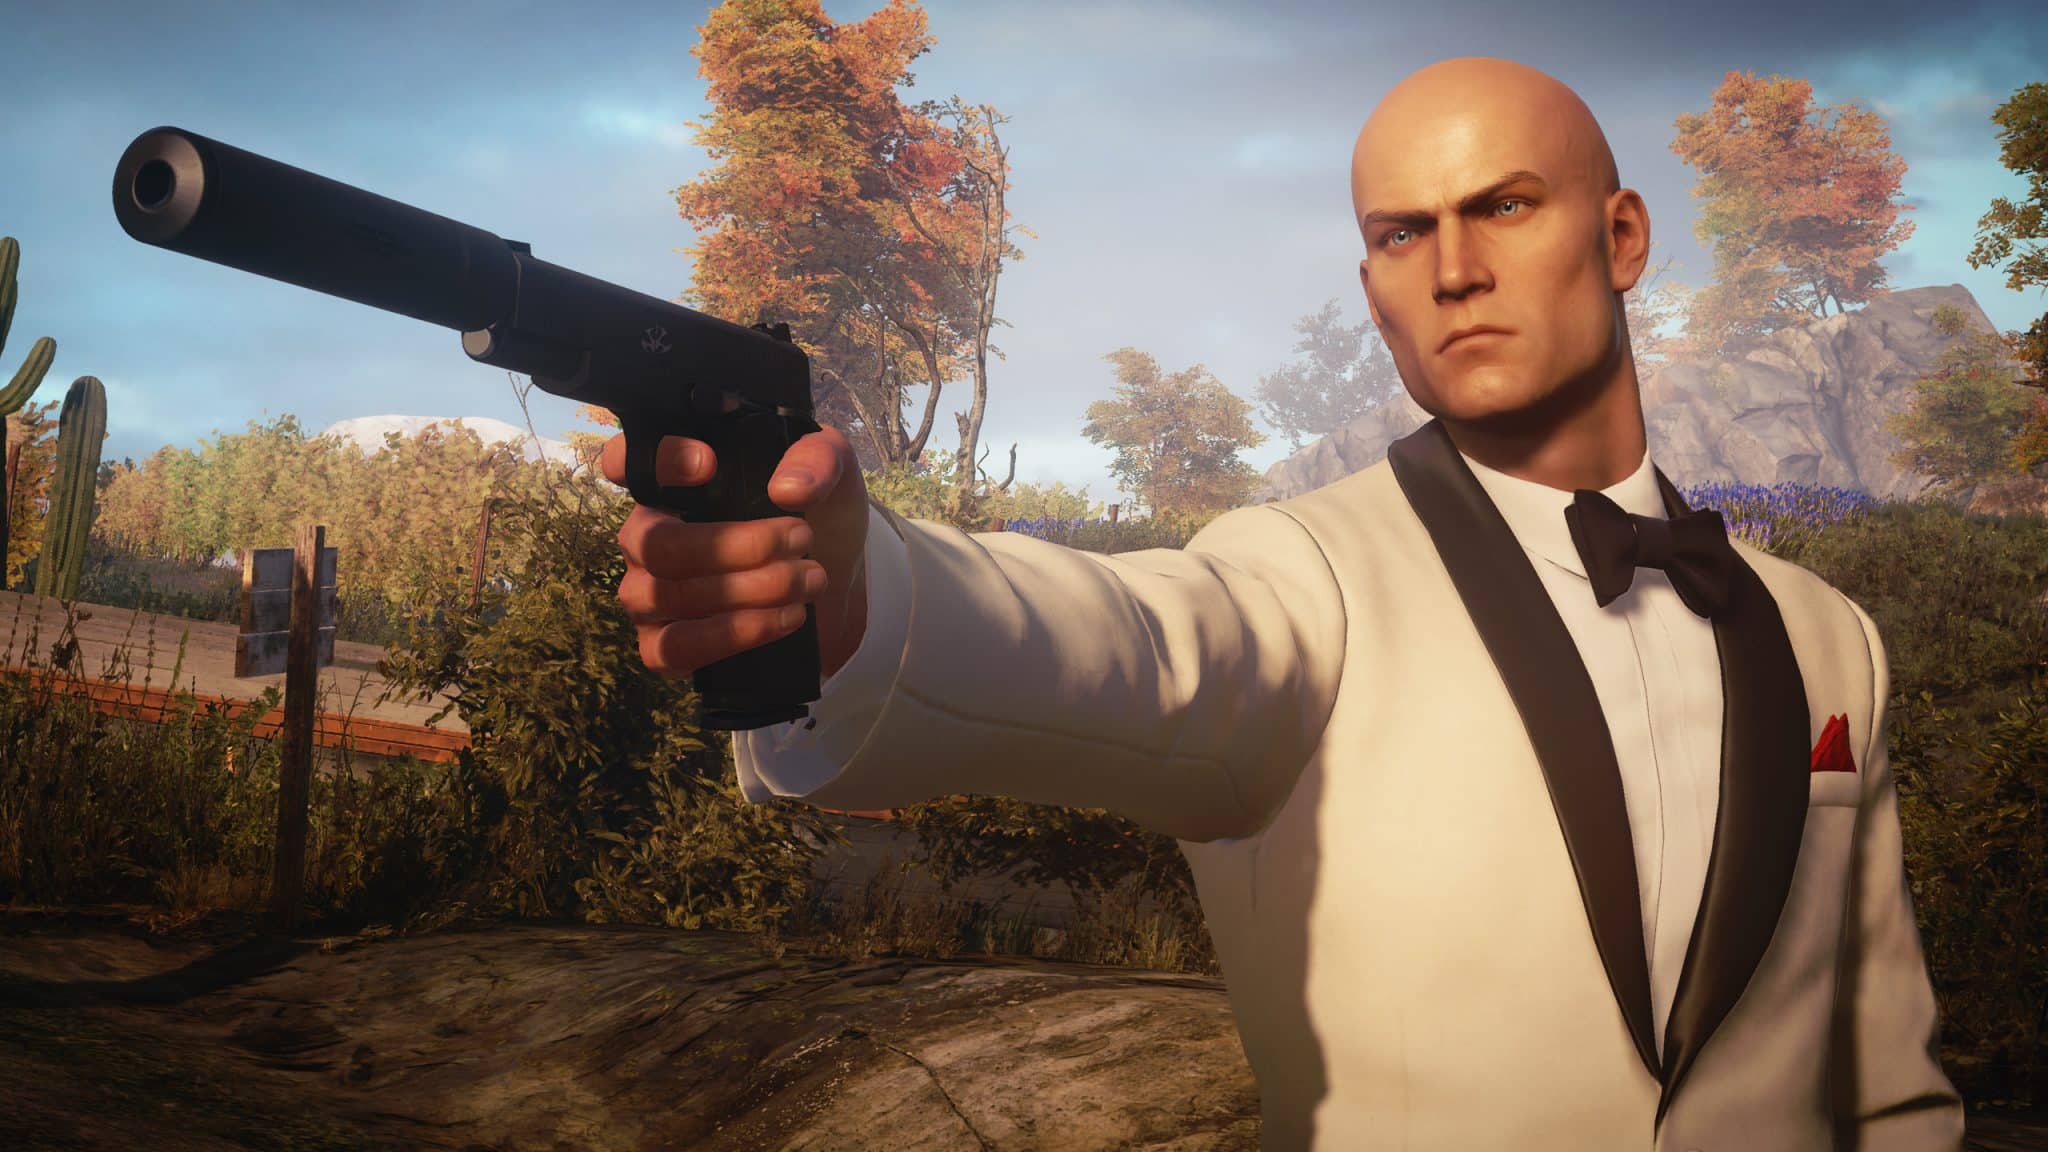 Hitman 3 screenshot showing Agent 47 with his weapon drawn